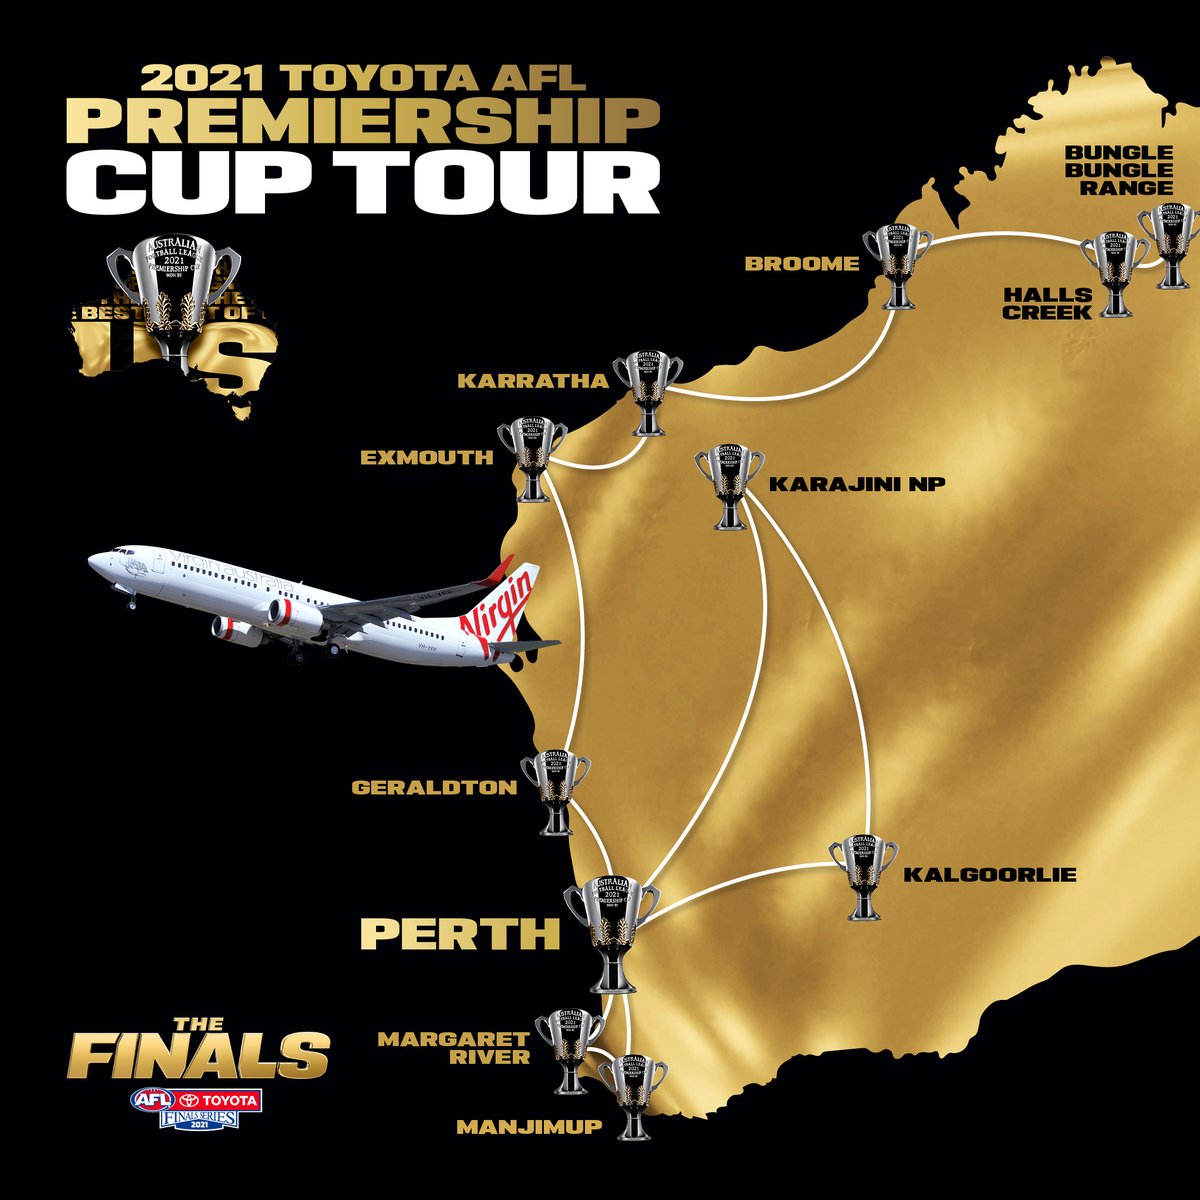 Head to Mercure Perth this weekend to snap your photo of the 2021 Toyota AFL Premiership Cup at one of the following sessions! 🏆 17th Sept 5pm-7pm 🏆 18th Sept 6pm-8pm 🏆 19th Sept 5pm-7pm For more details on the upcoming AFL Grand Final, click the link! destinationperth.com.au/event/2021-toy…